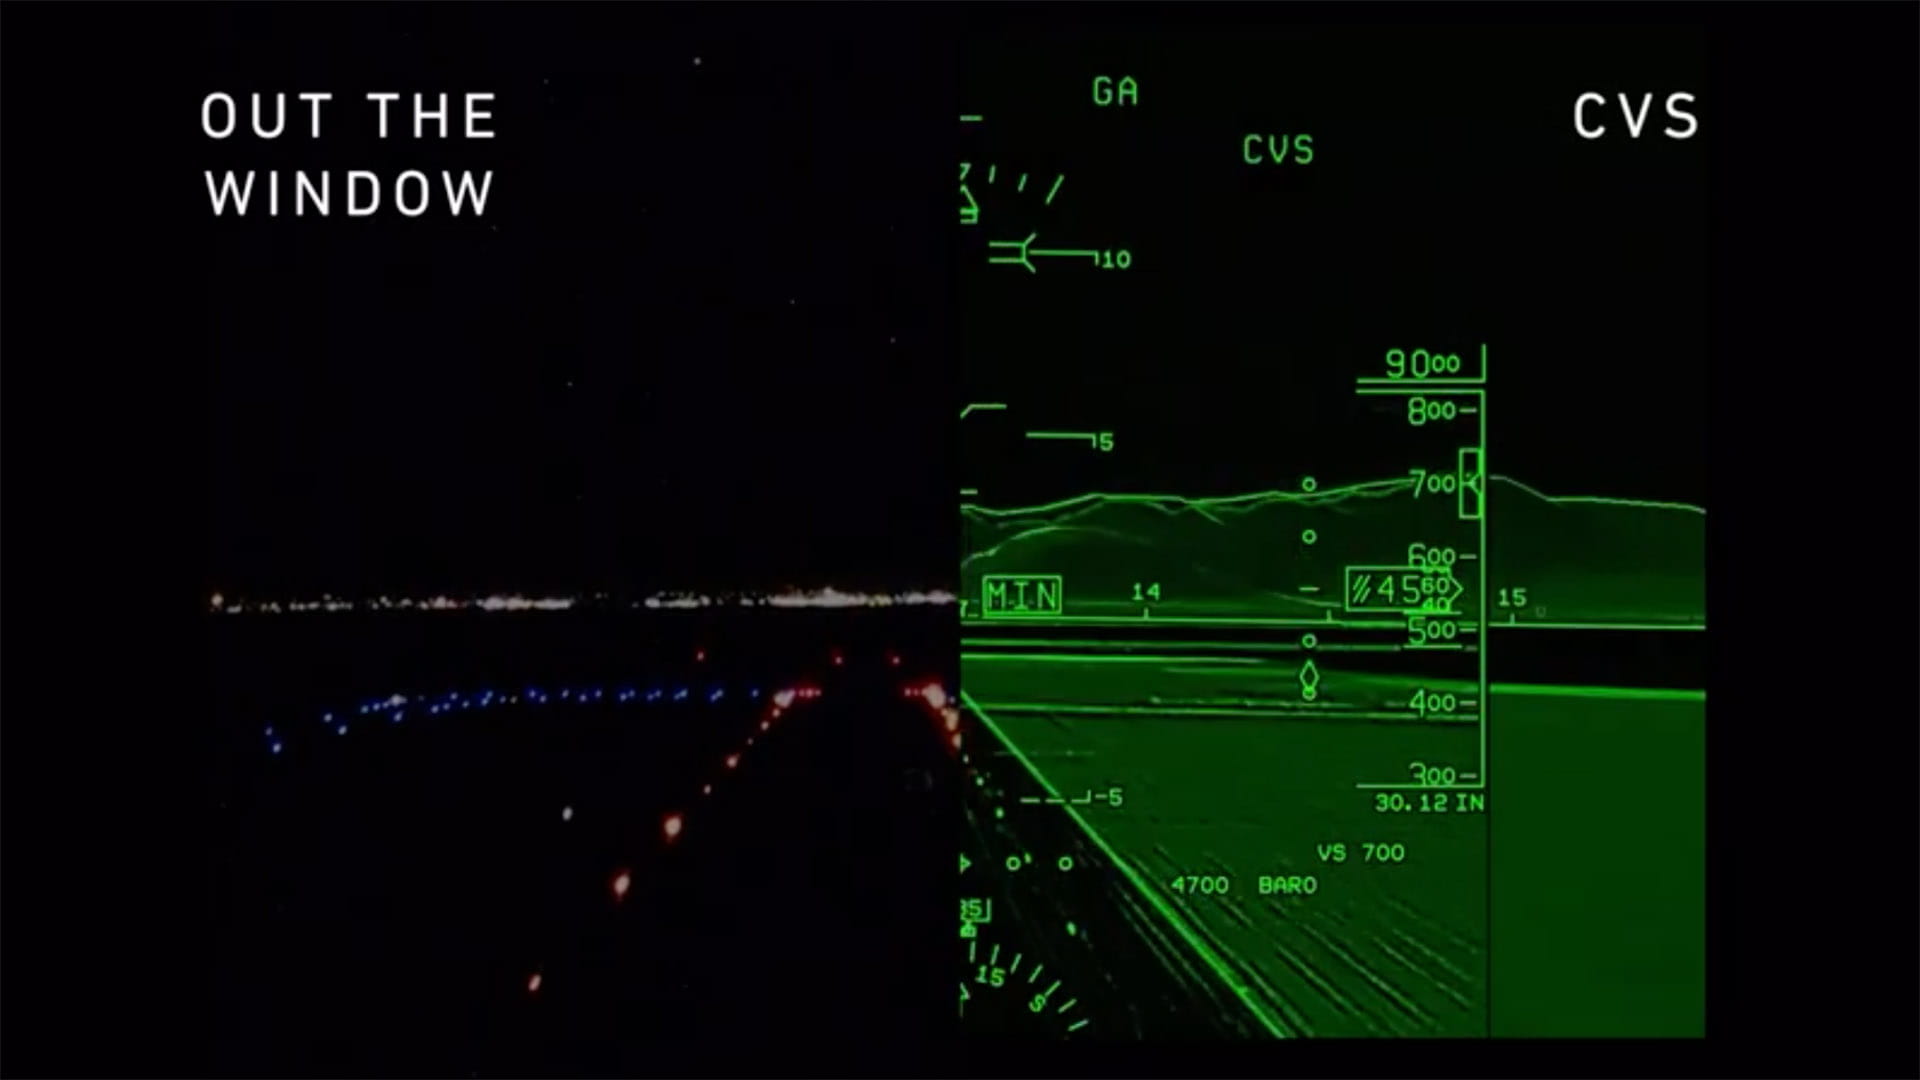 Comparison of a view out the window of an aircraft vs. the same view through Collins Combined Vision System (CVS)